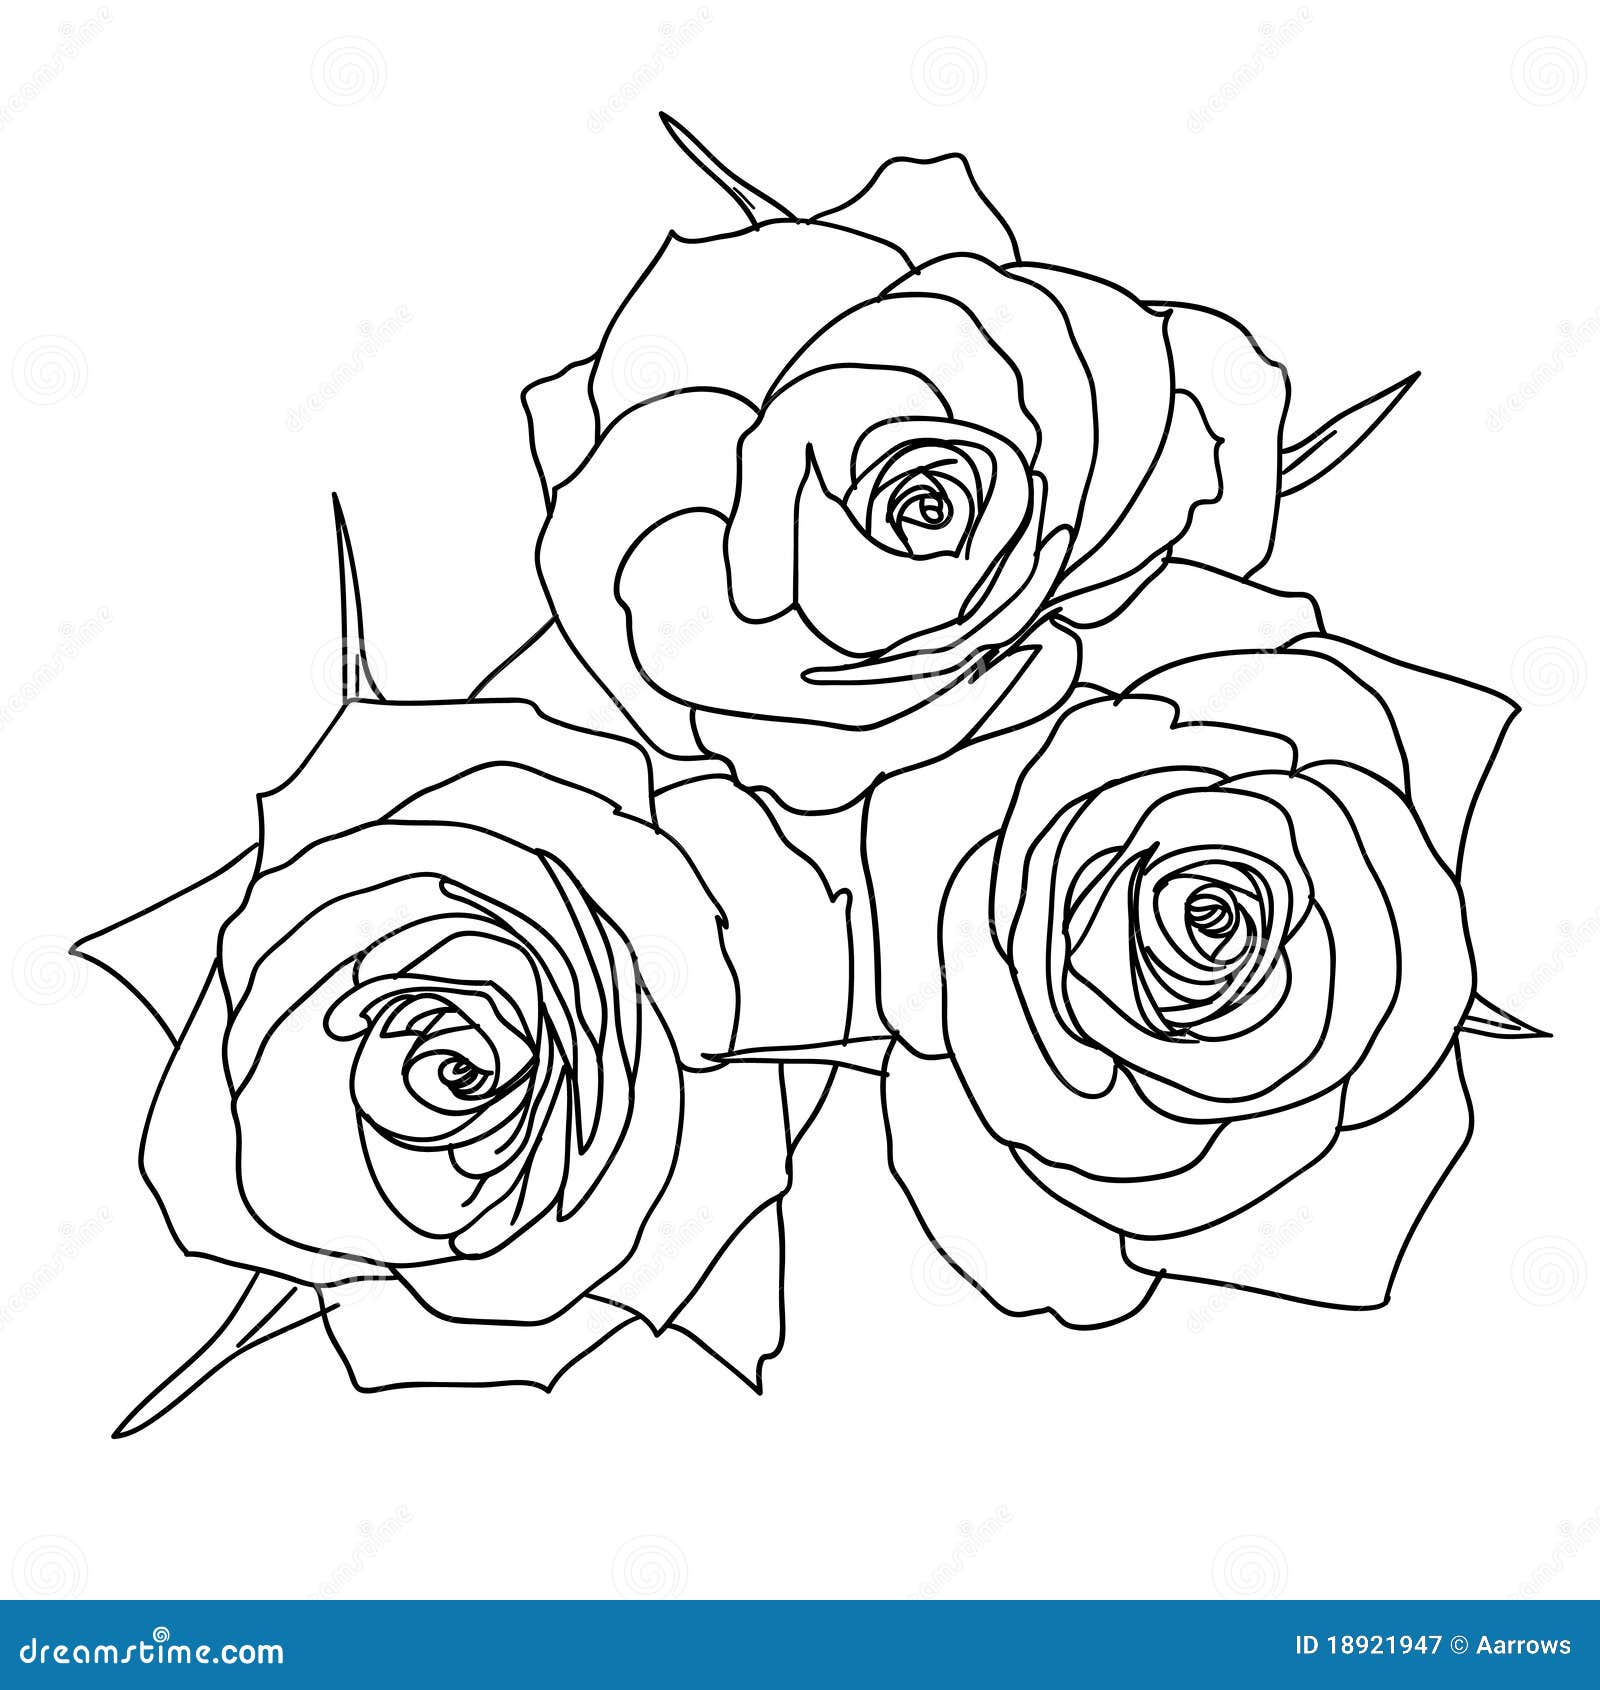 584 Three Roses Tattoo Images Stock Photos  Vectors  Shutterstock